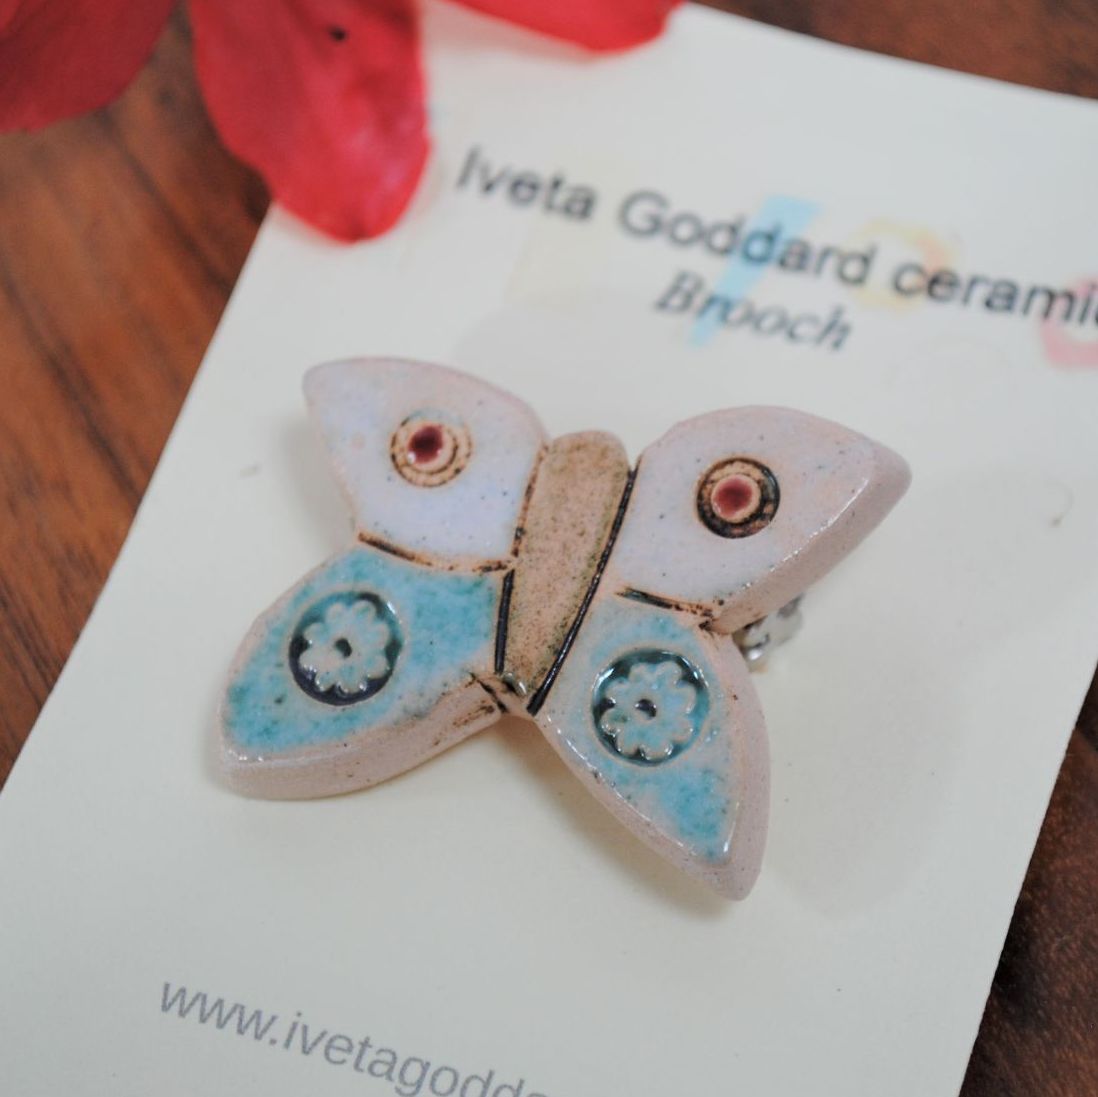 Ceramic Brooch - Butterfly Turquoise and White